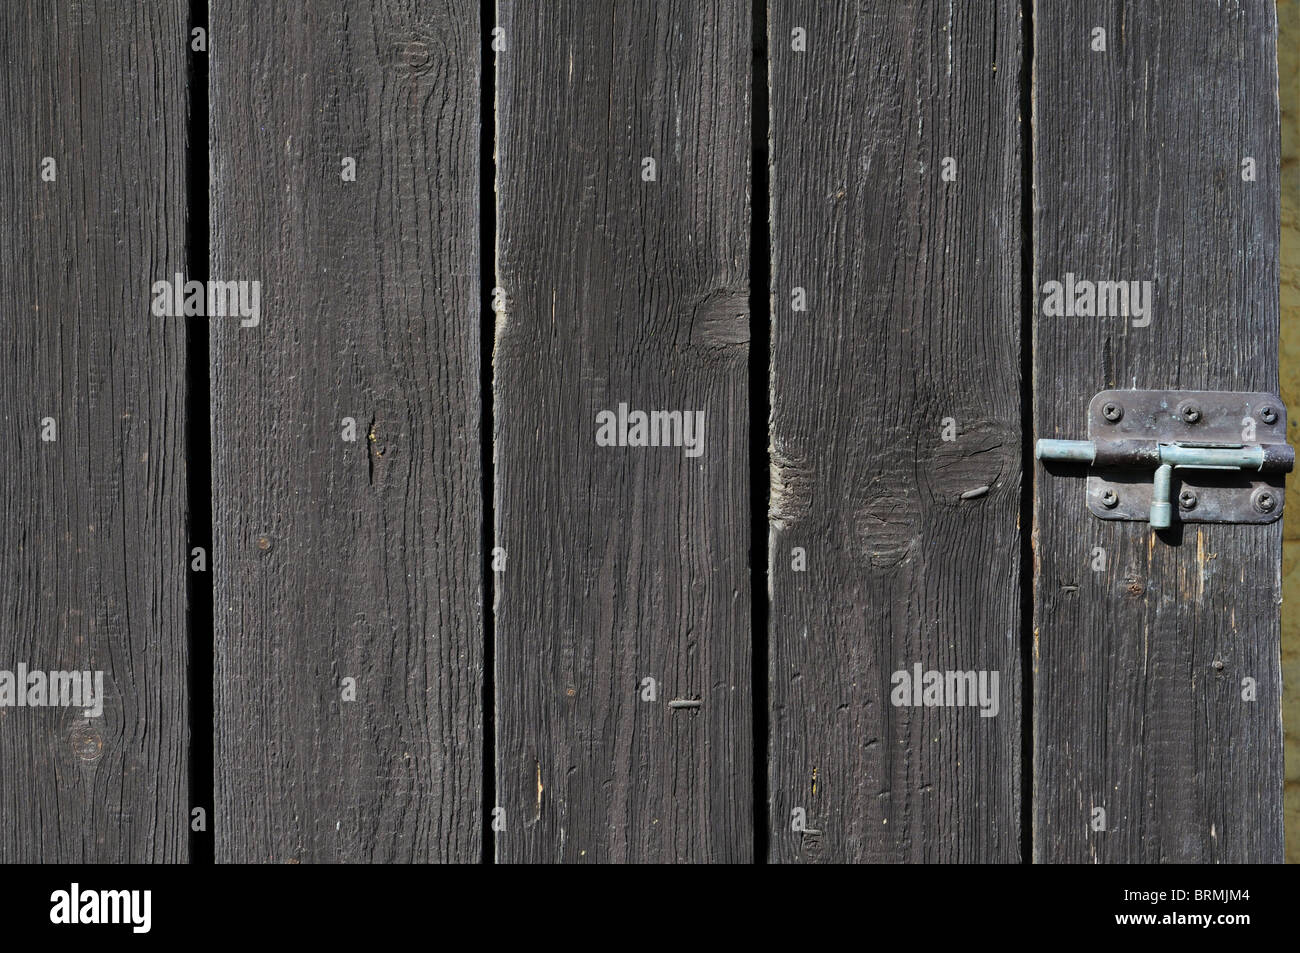 Old shabby wooden wall with a bolt. Stock Photo